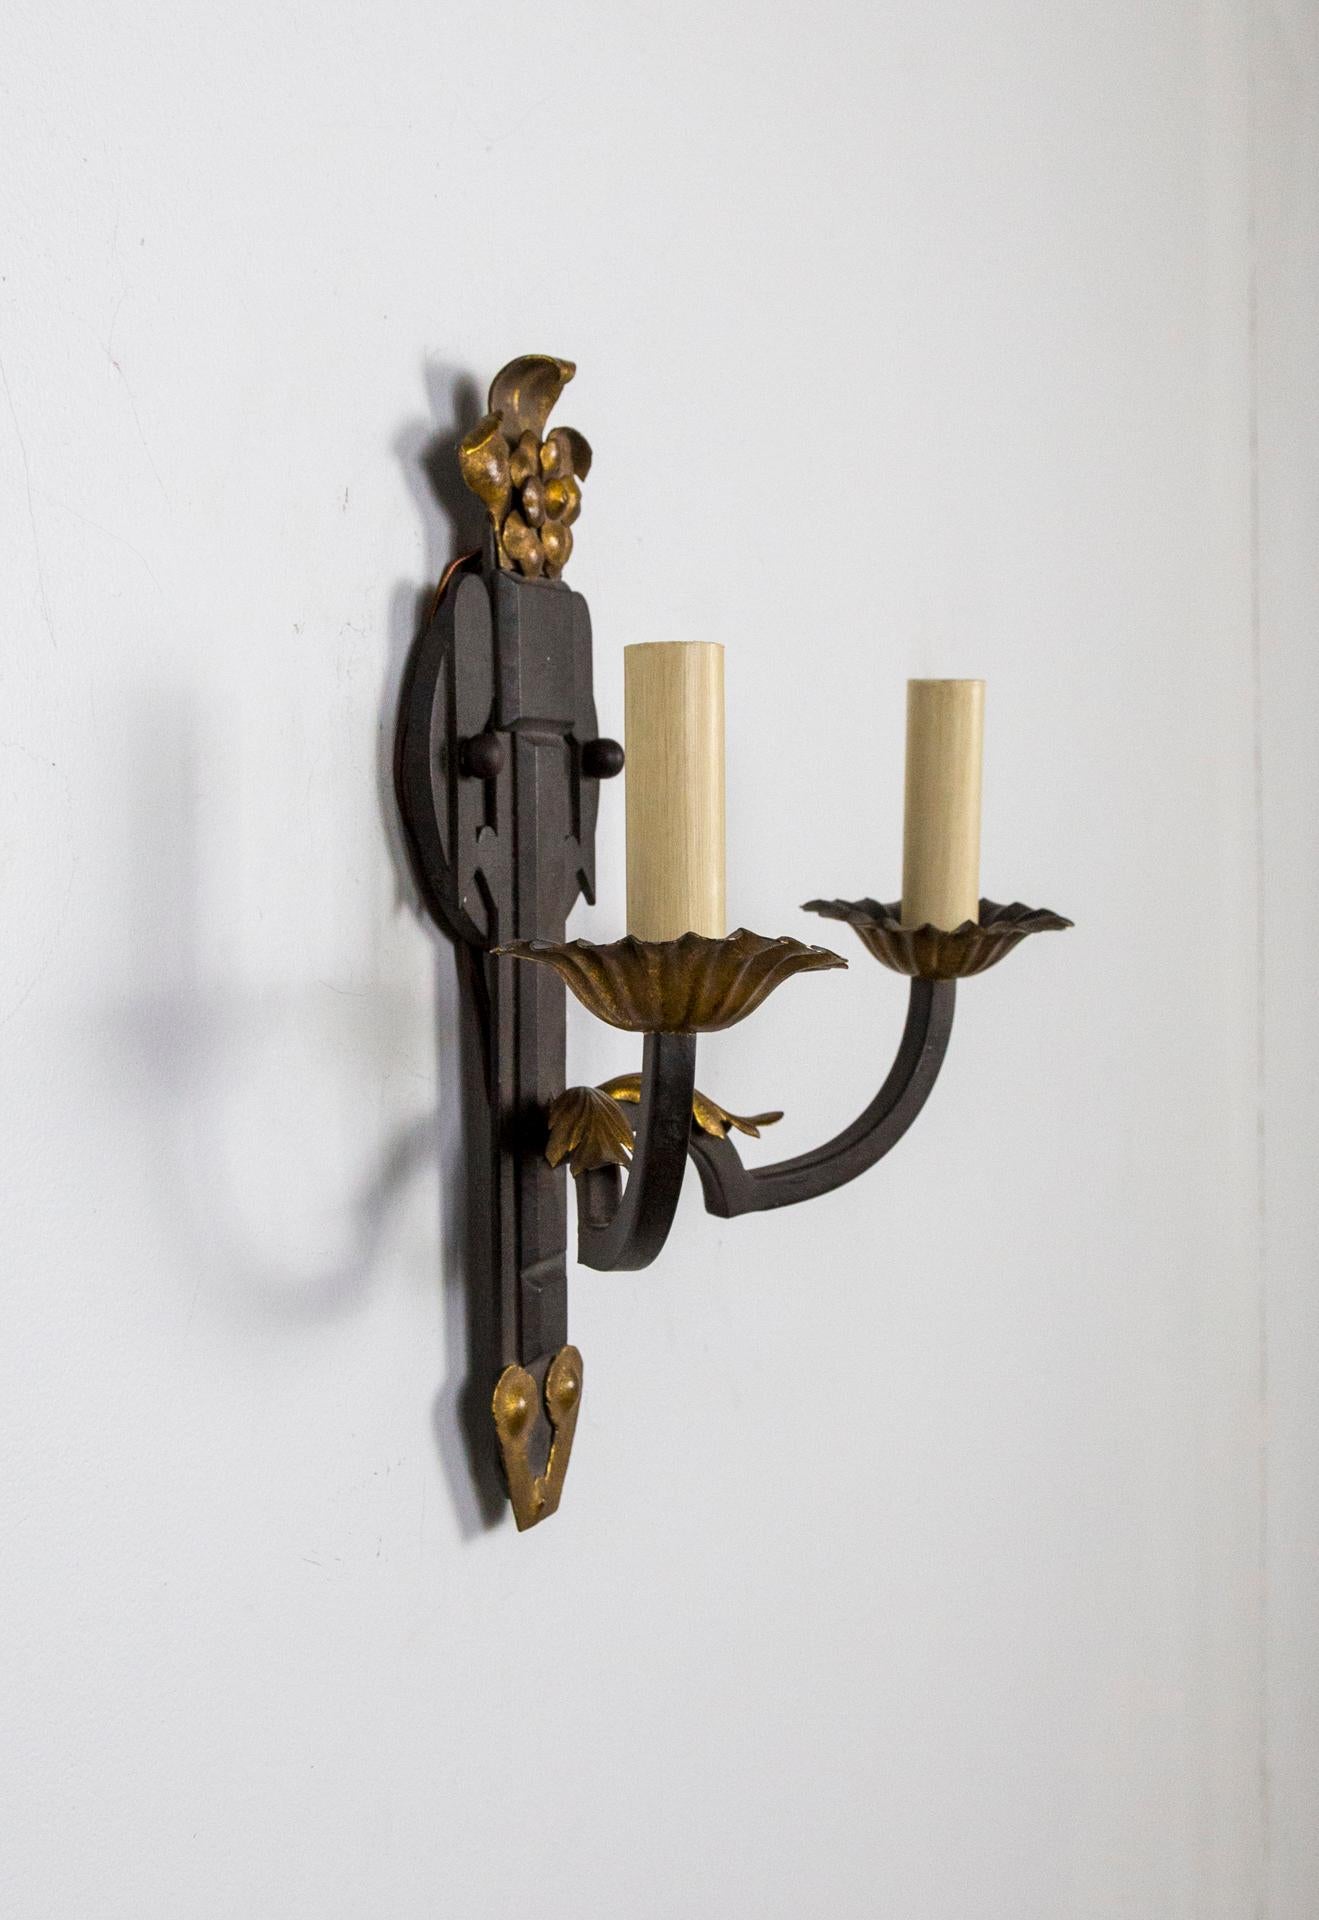 A pair of handsome, wrought-iron, 2-arm wall lights by Paul Ferrante with Deco-esque backplates adorned with a gilt flower at the tops, and gilt acanthus leaf accents.  Each arm holds a candelabra bulb.  UL listed.  14.5” height x 14.25 width x 6.25